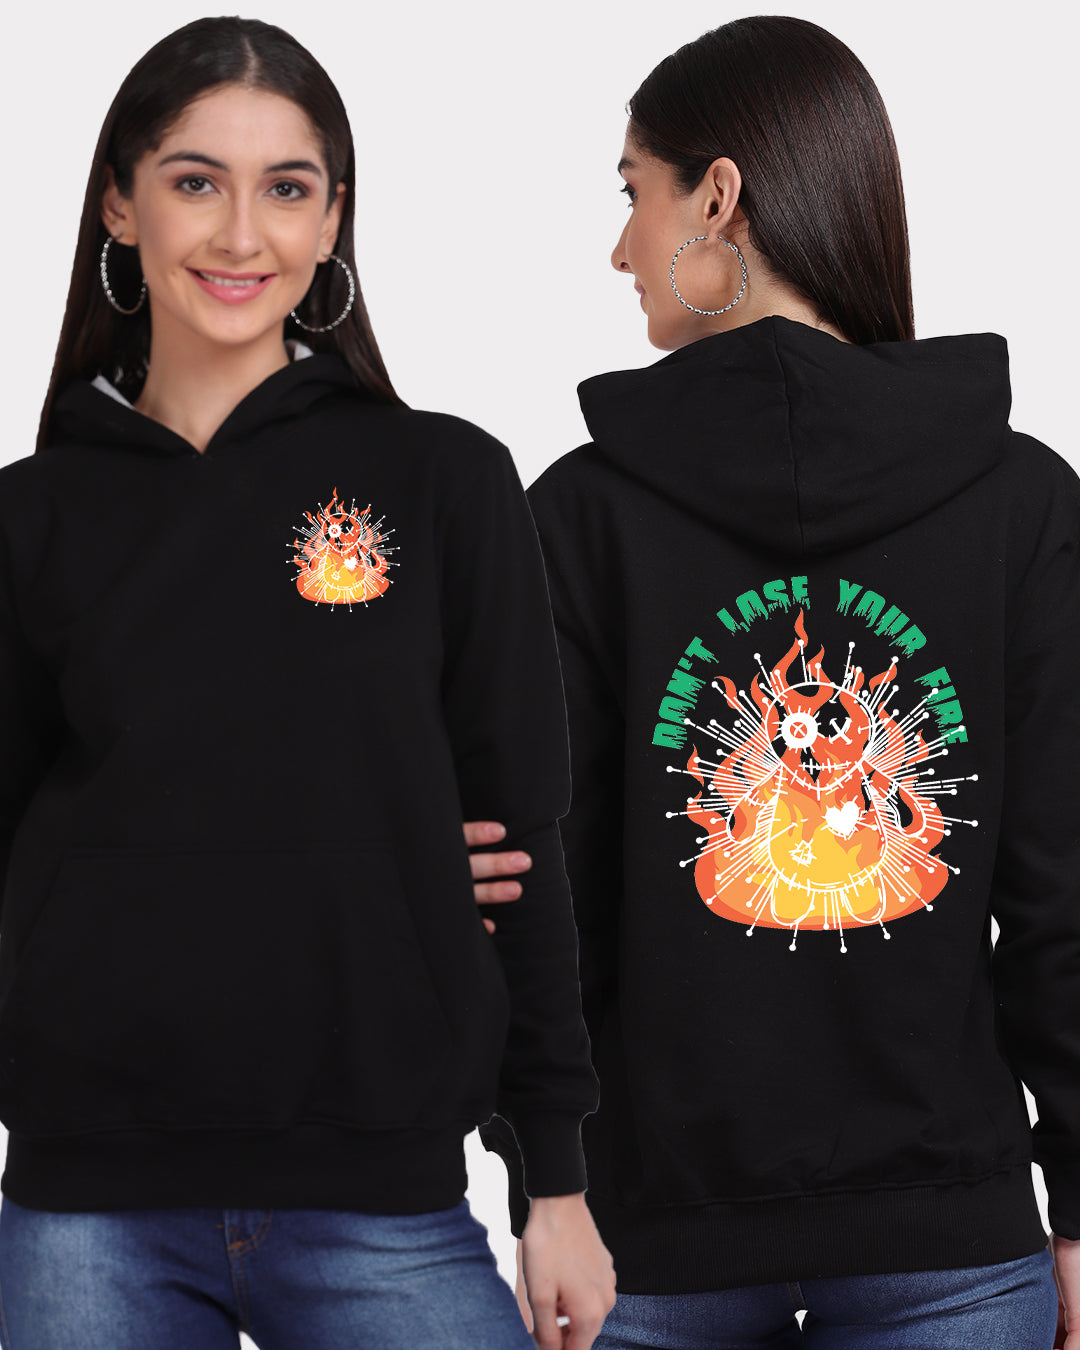 Don't Lose Your Fire Women Hoodie